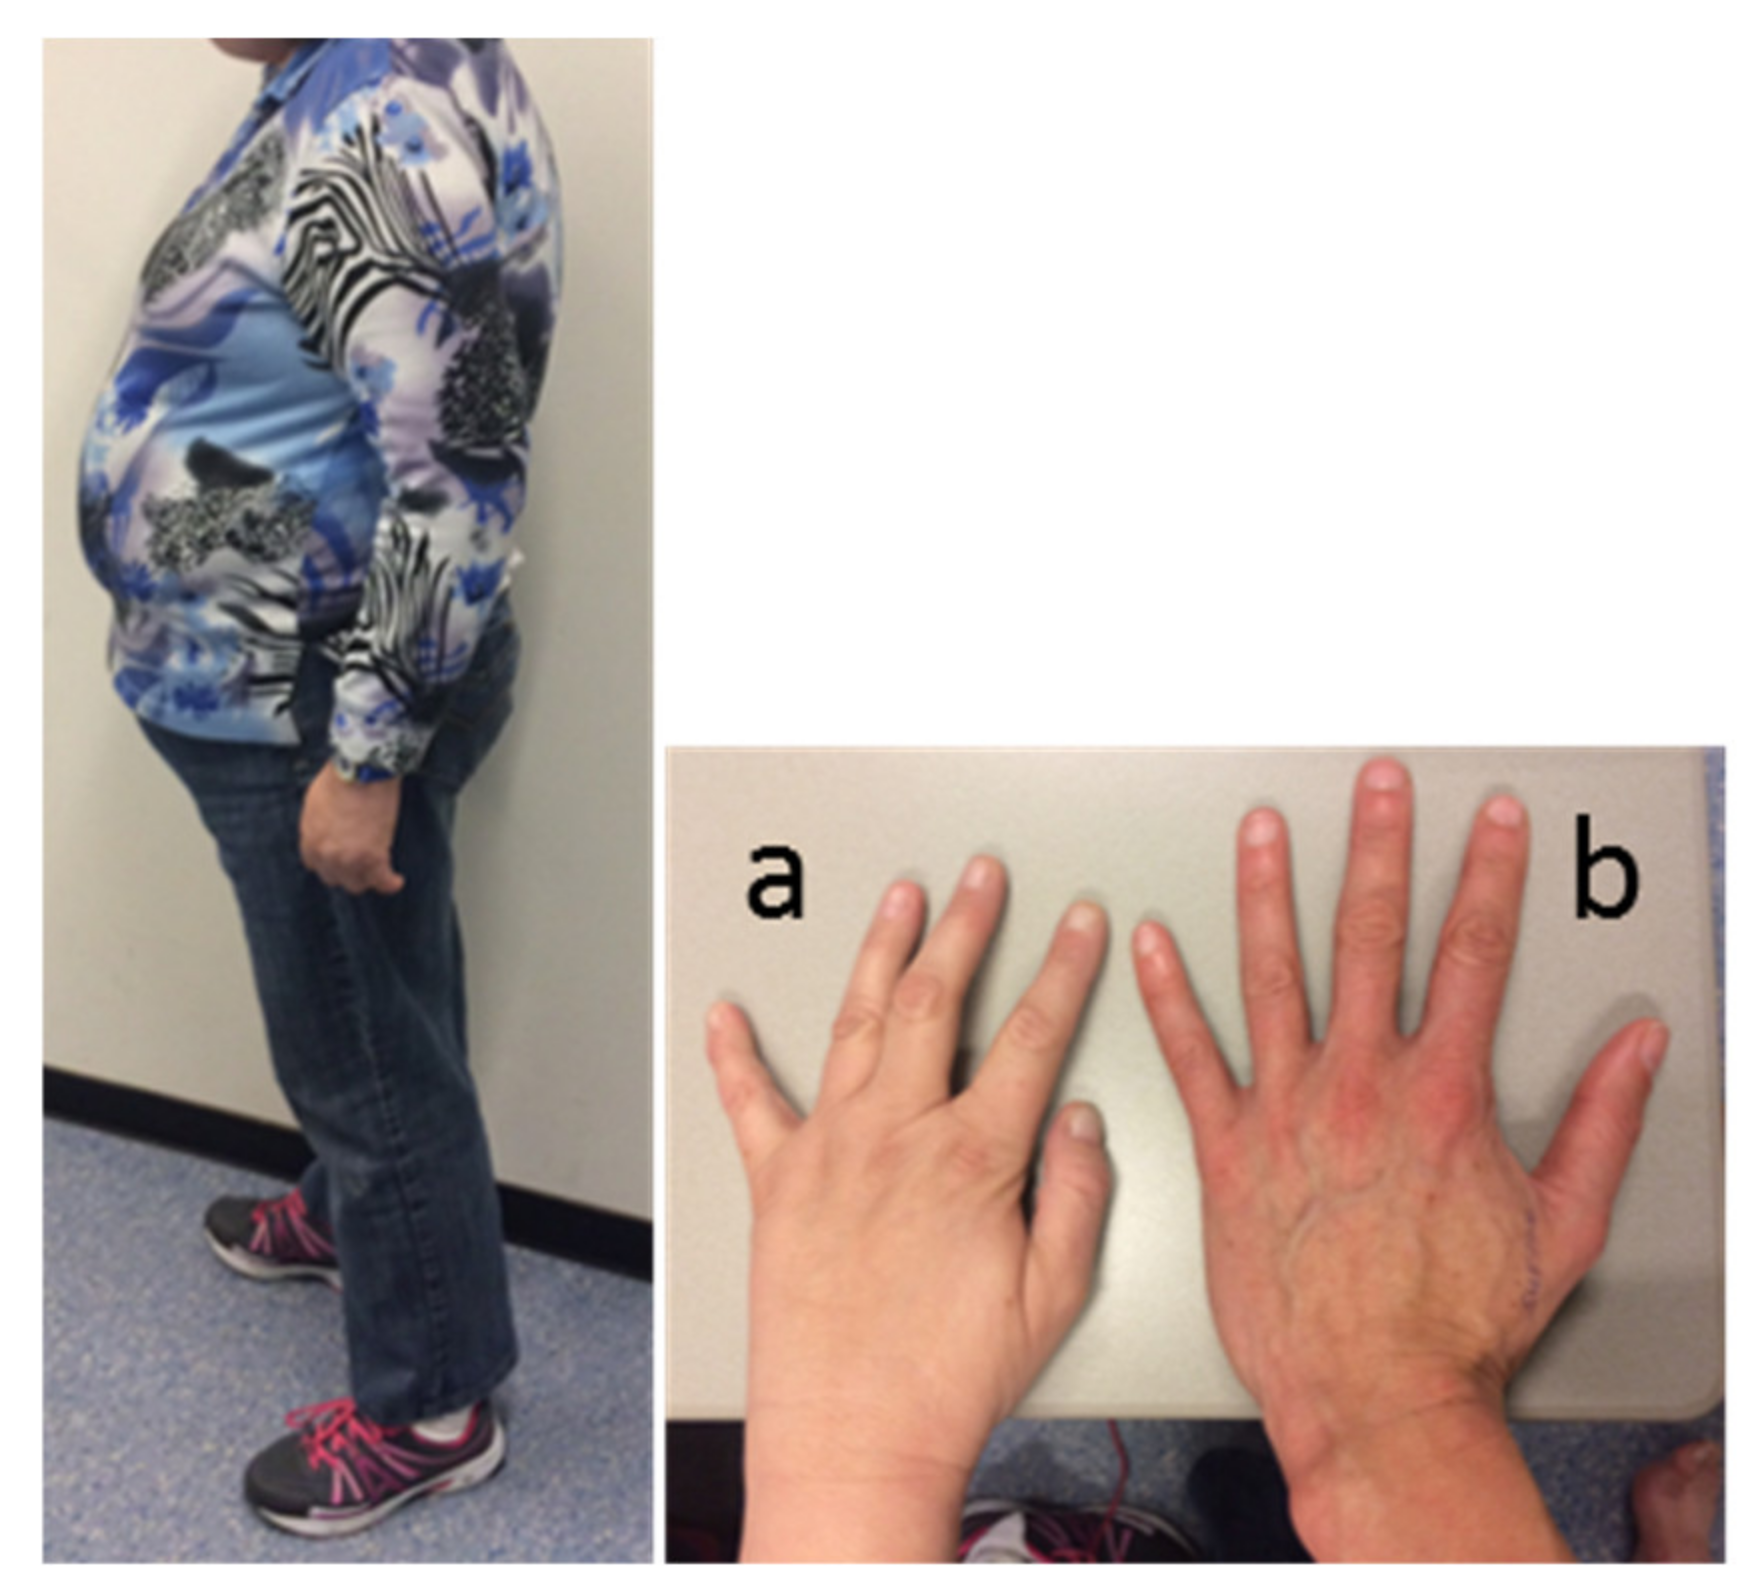 Small hands characteristic of Prader-Willi syndrome.